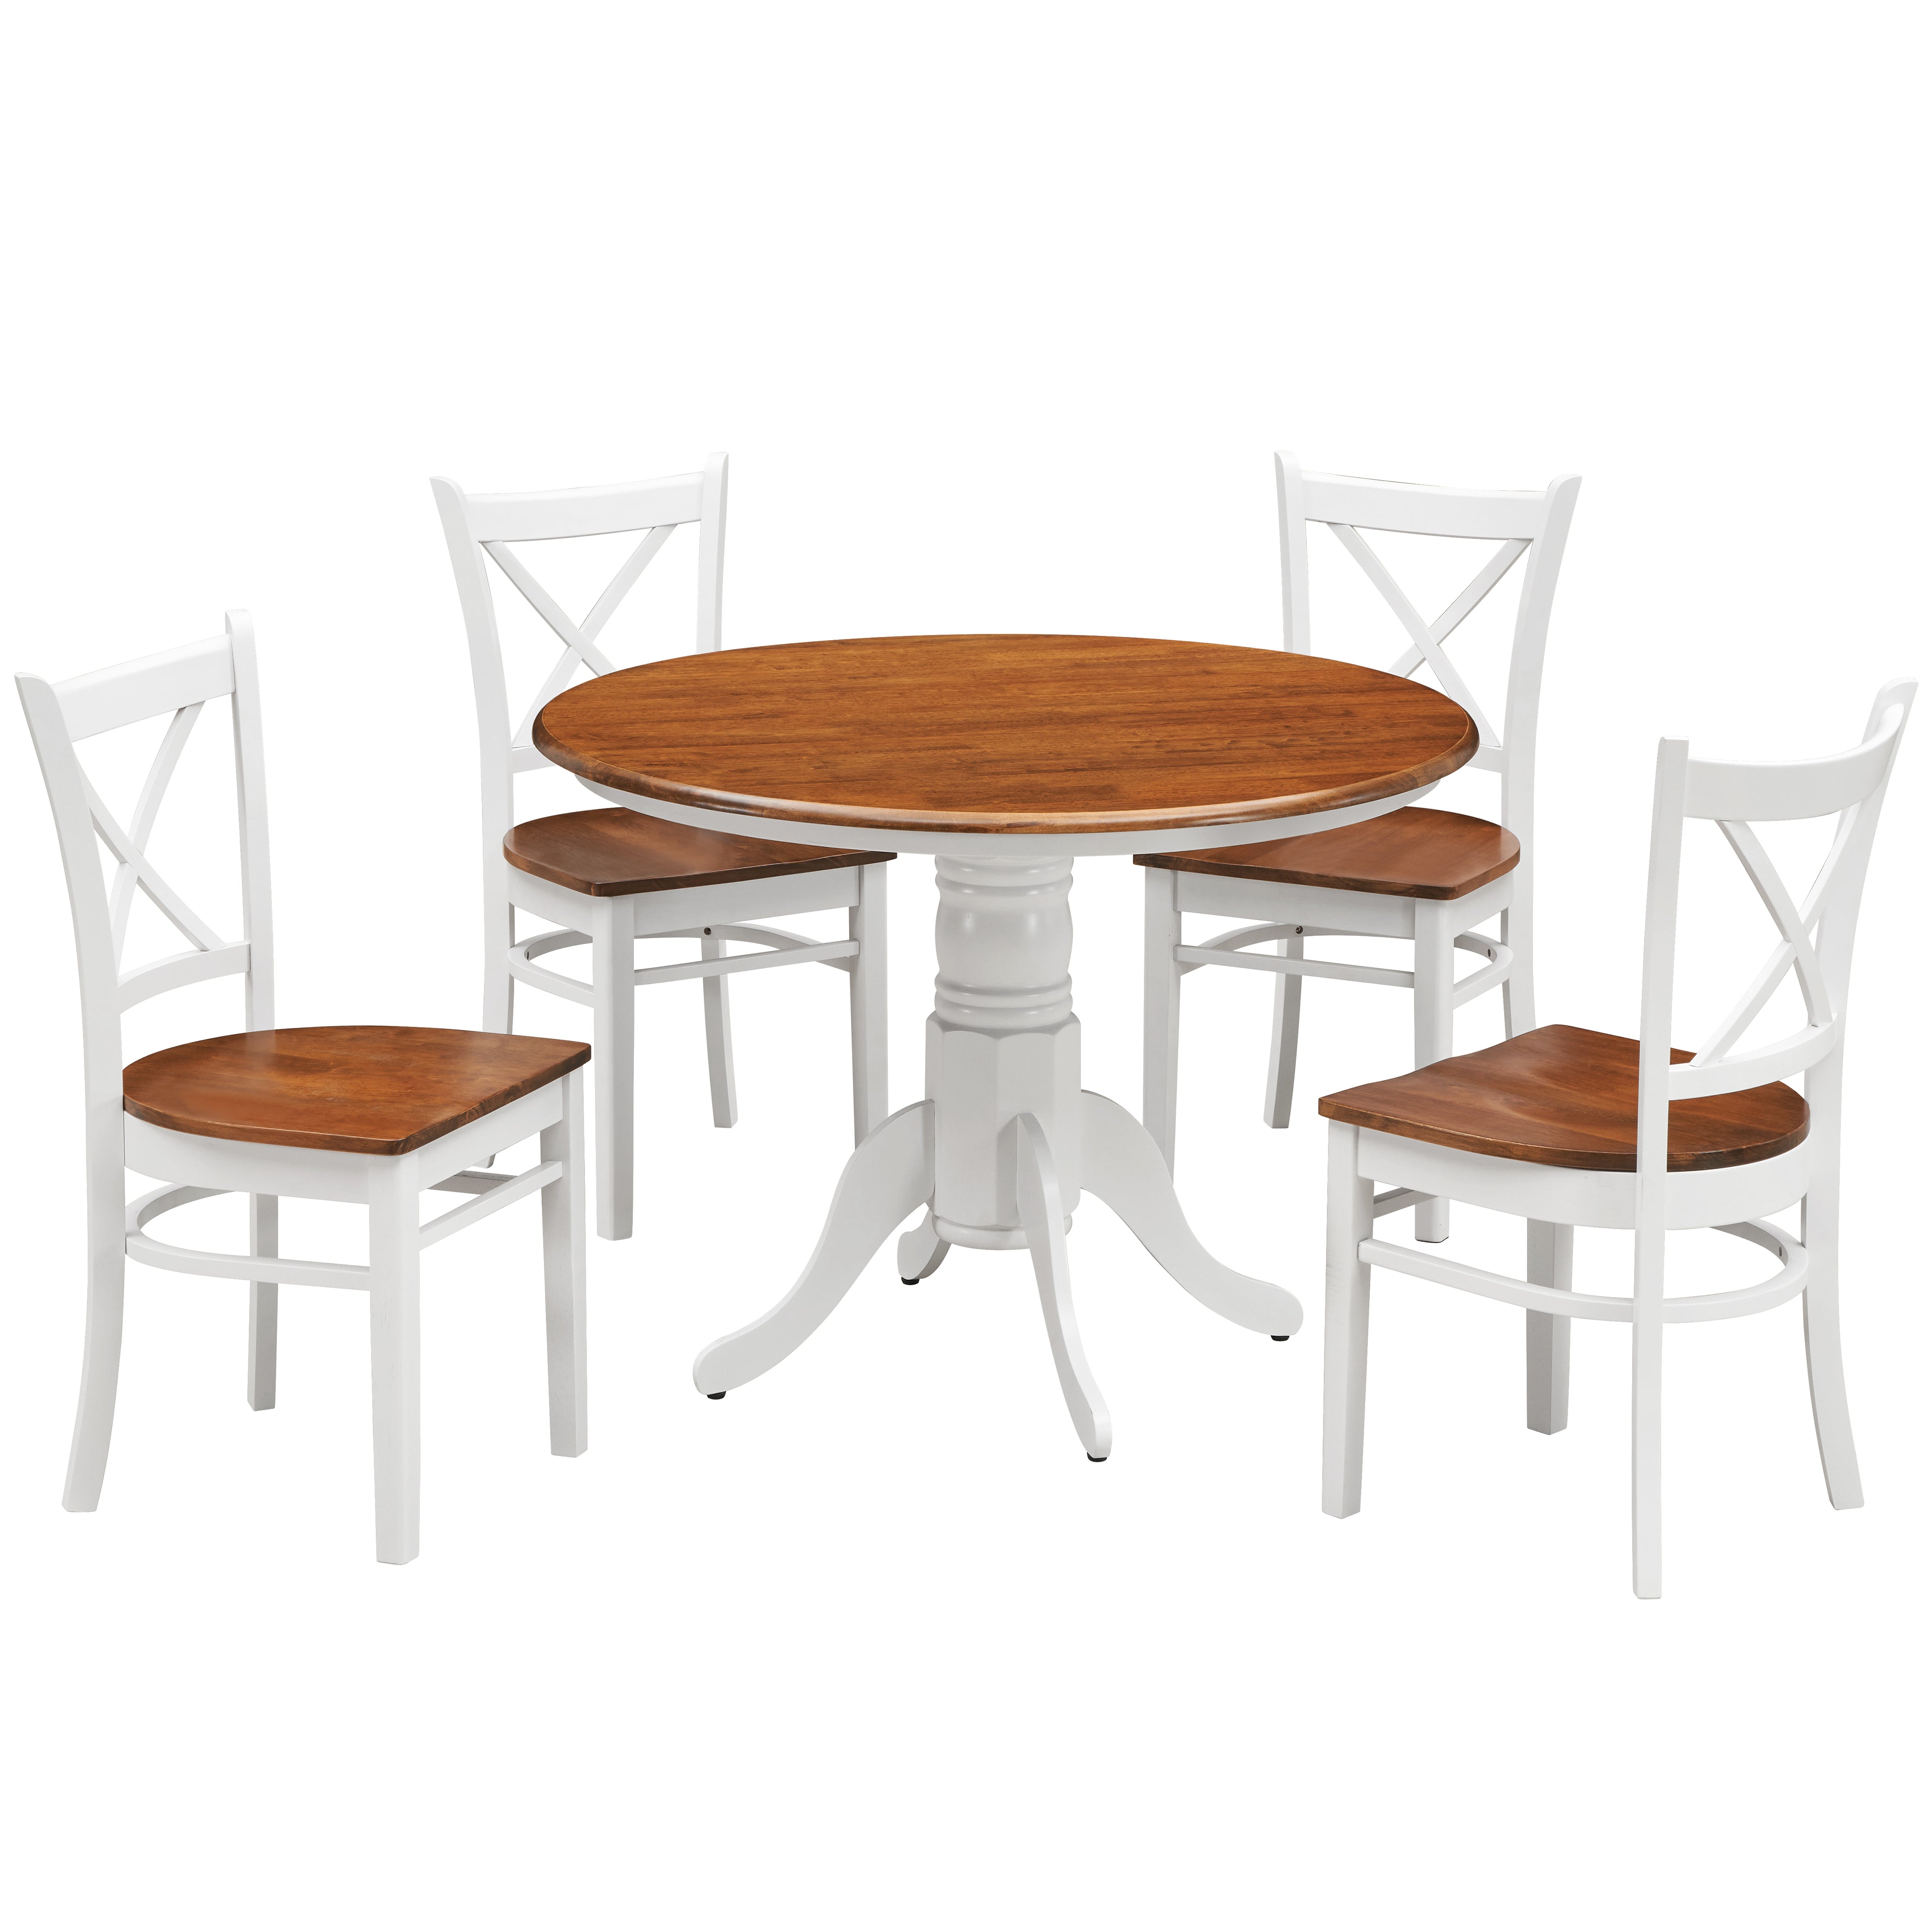 Lupin 5pc Dining Set 106cm Round Pedestral Table 4 Rubber Wood Chair - White Oak - SILBERSHELL